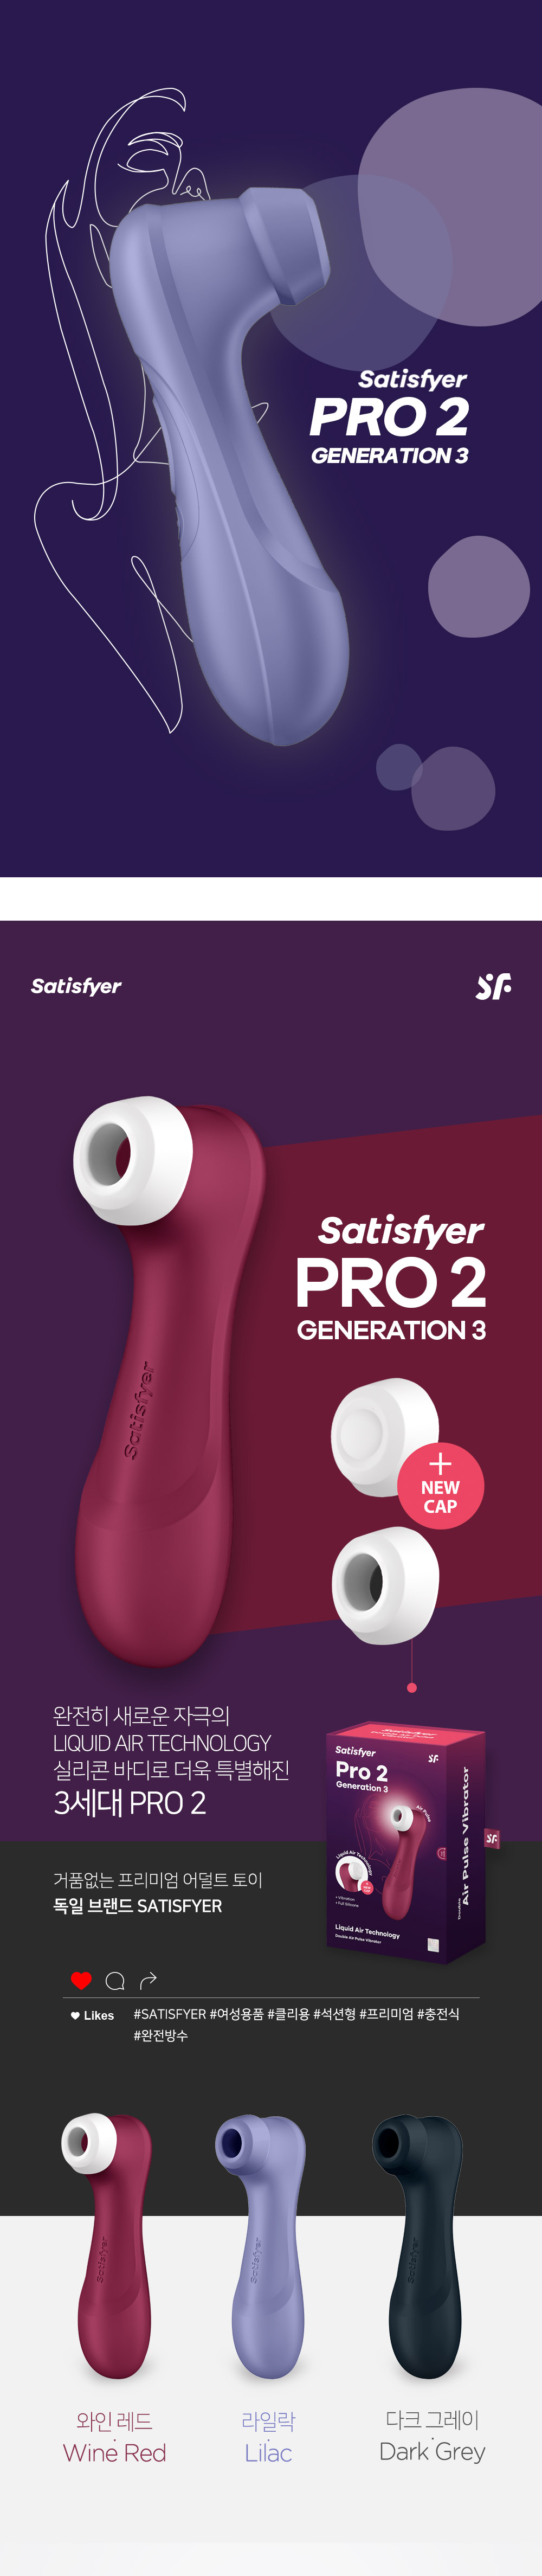 PRO 2 GENERATION 3 WITH LIQUID AIR (3 COLOR)